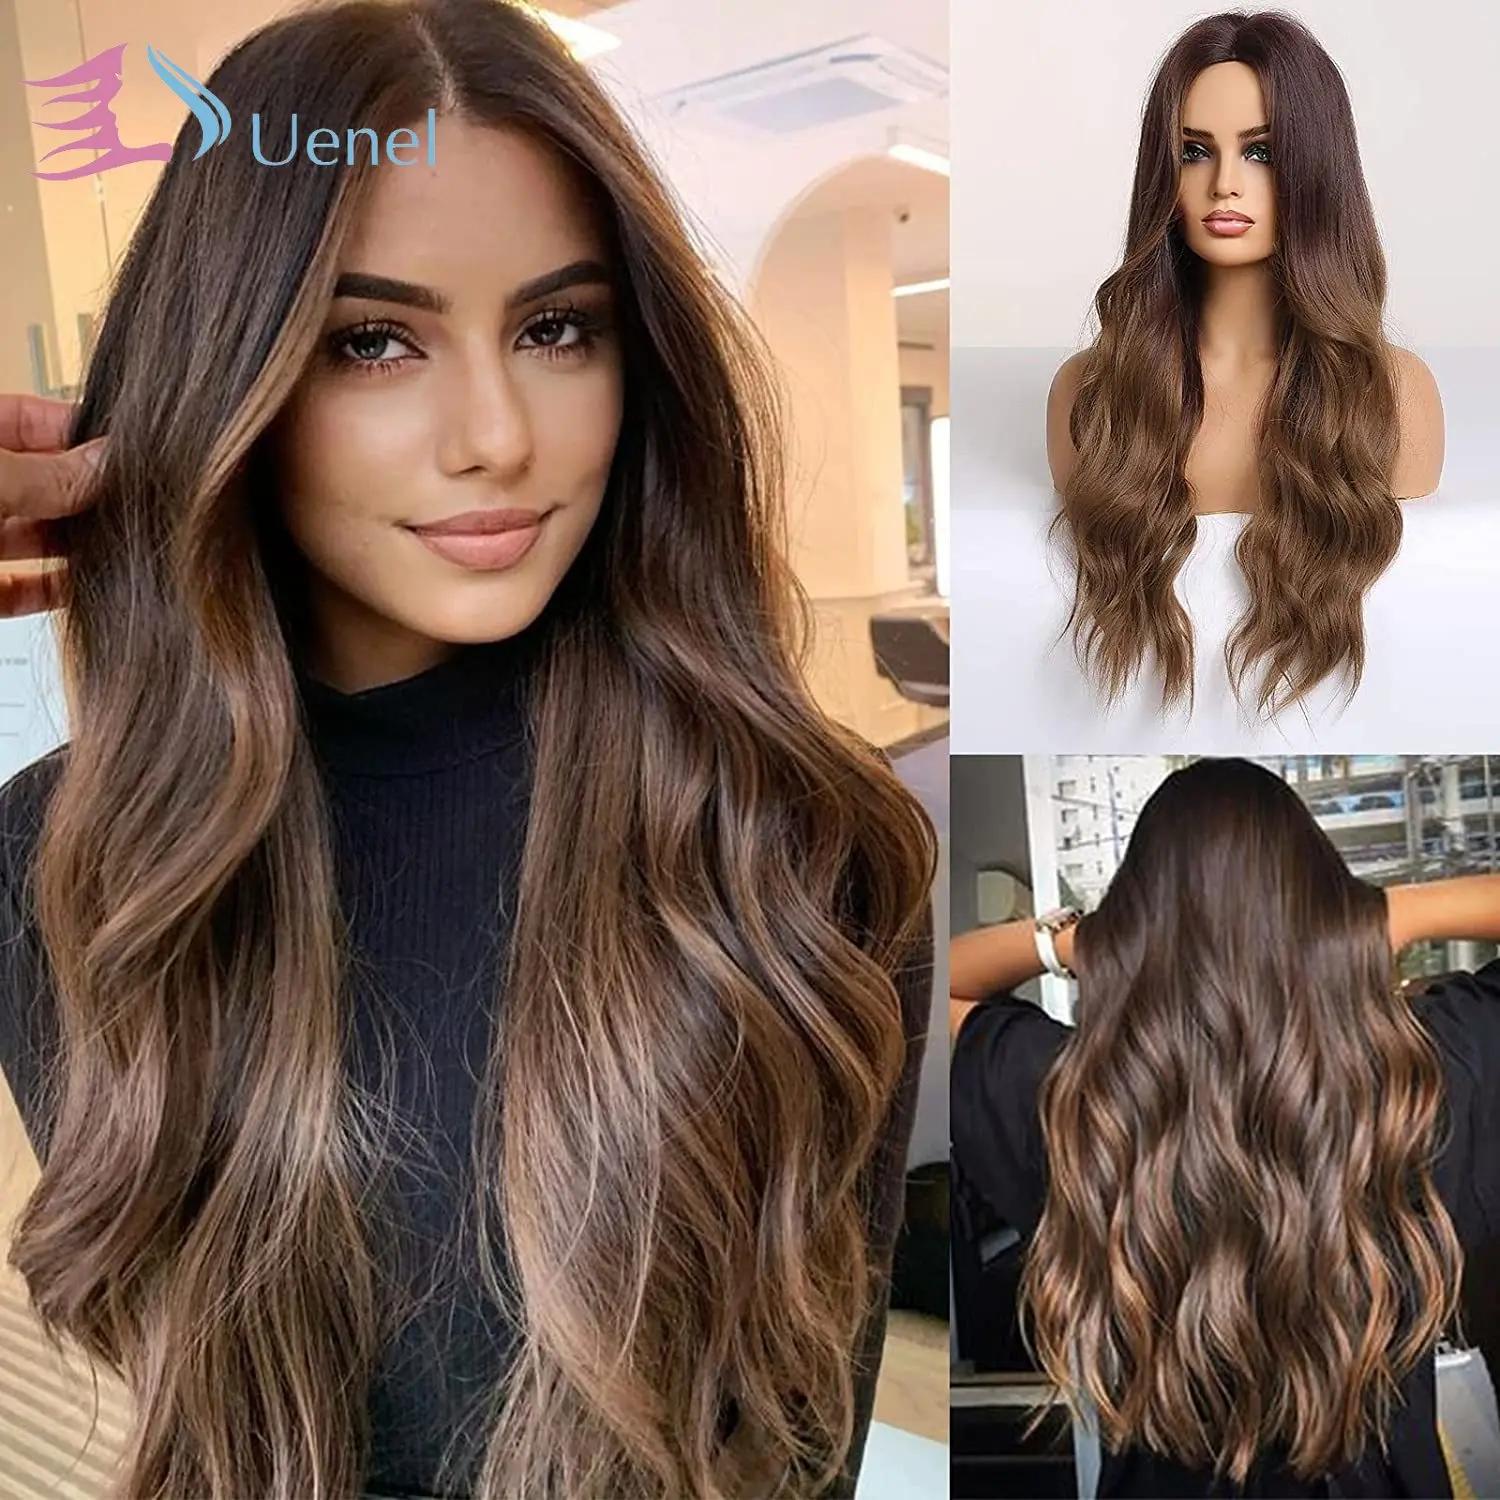 

Uenel Long Ombre Brown Hair Wig for Women Synthetic Curly Hair Wig Middle Parting 26"